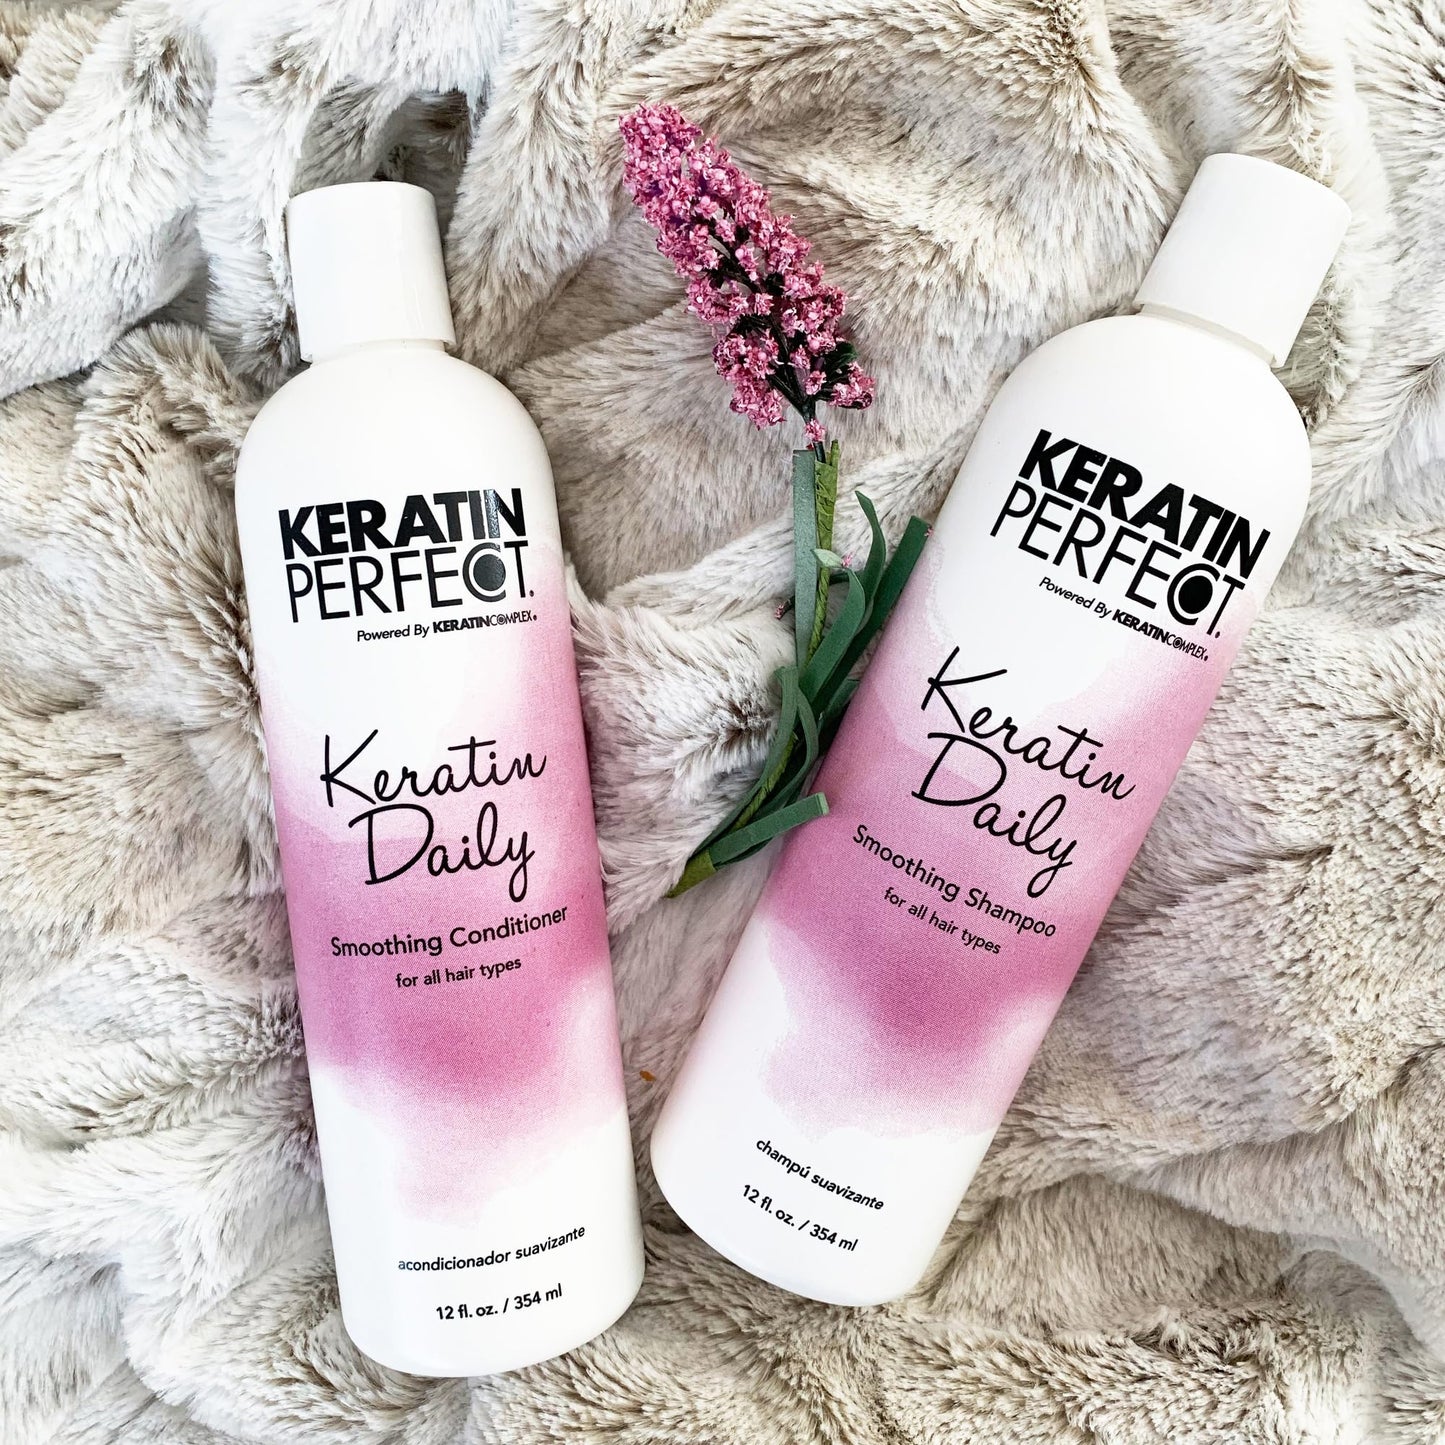 Keratin Perfect Daily Conditioner - Salon Level Treatment For Women - The Best Conditioning Formula For A Frizzy And Dull Mane - Keratin Treatment Not Necessary - Suitable For All Hair Types - 12 Oz